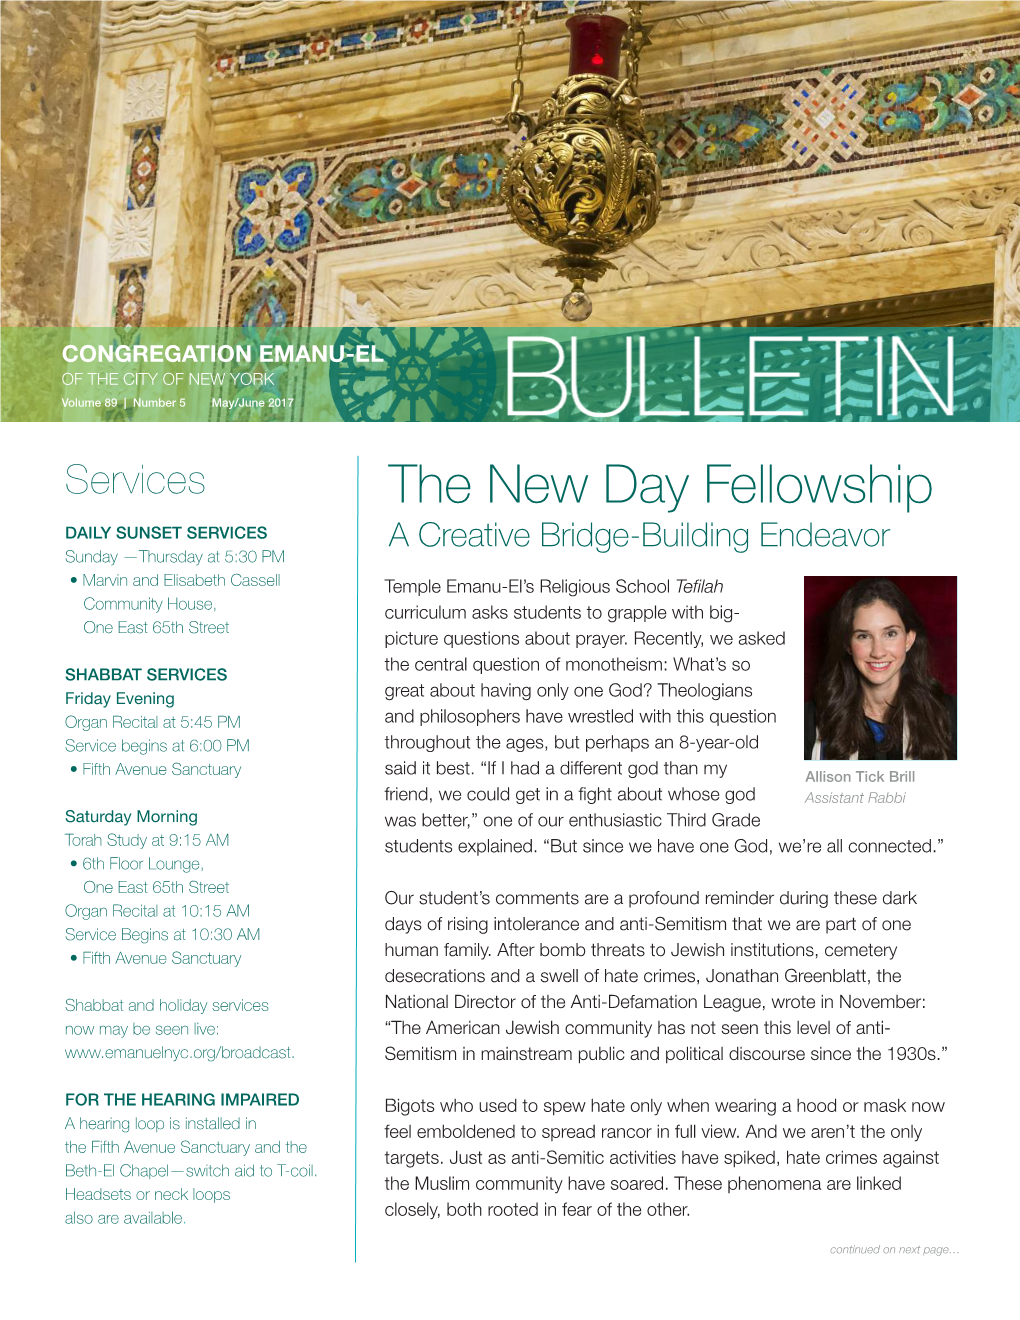 The New Day Fellowship